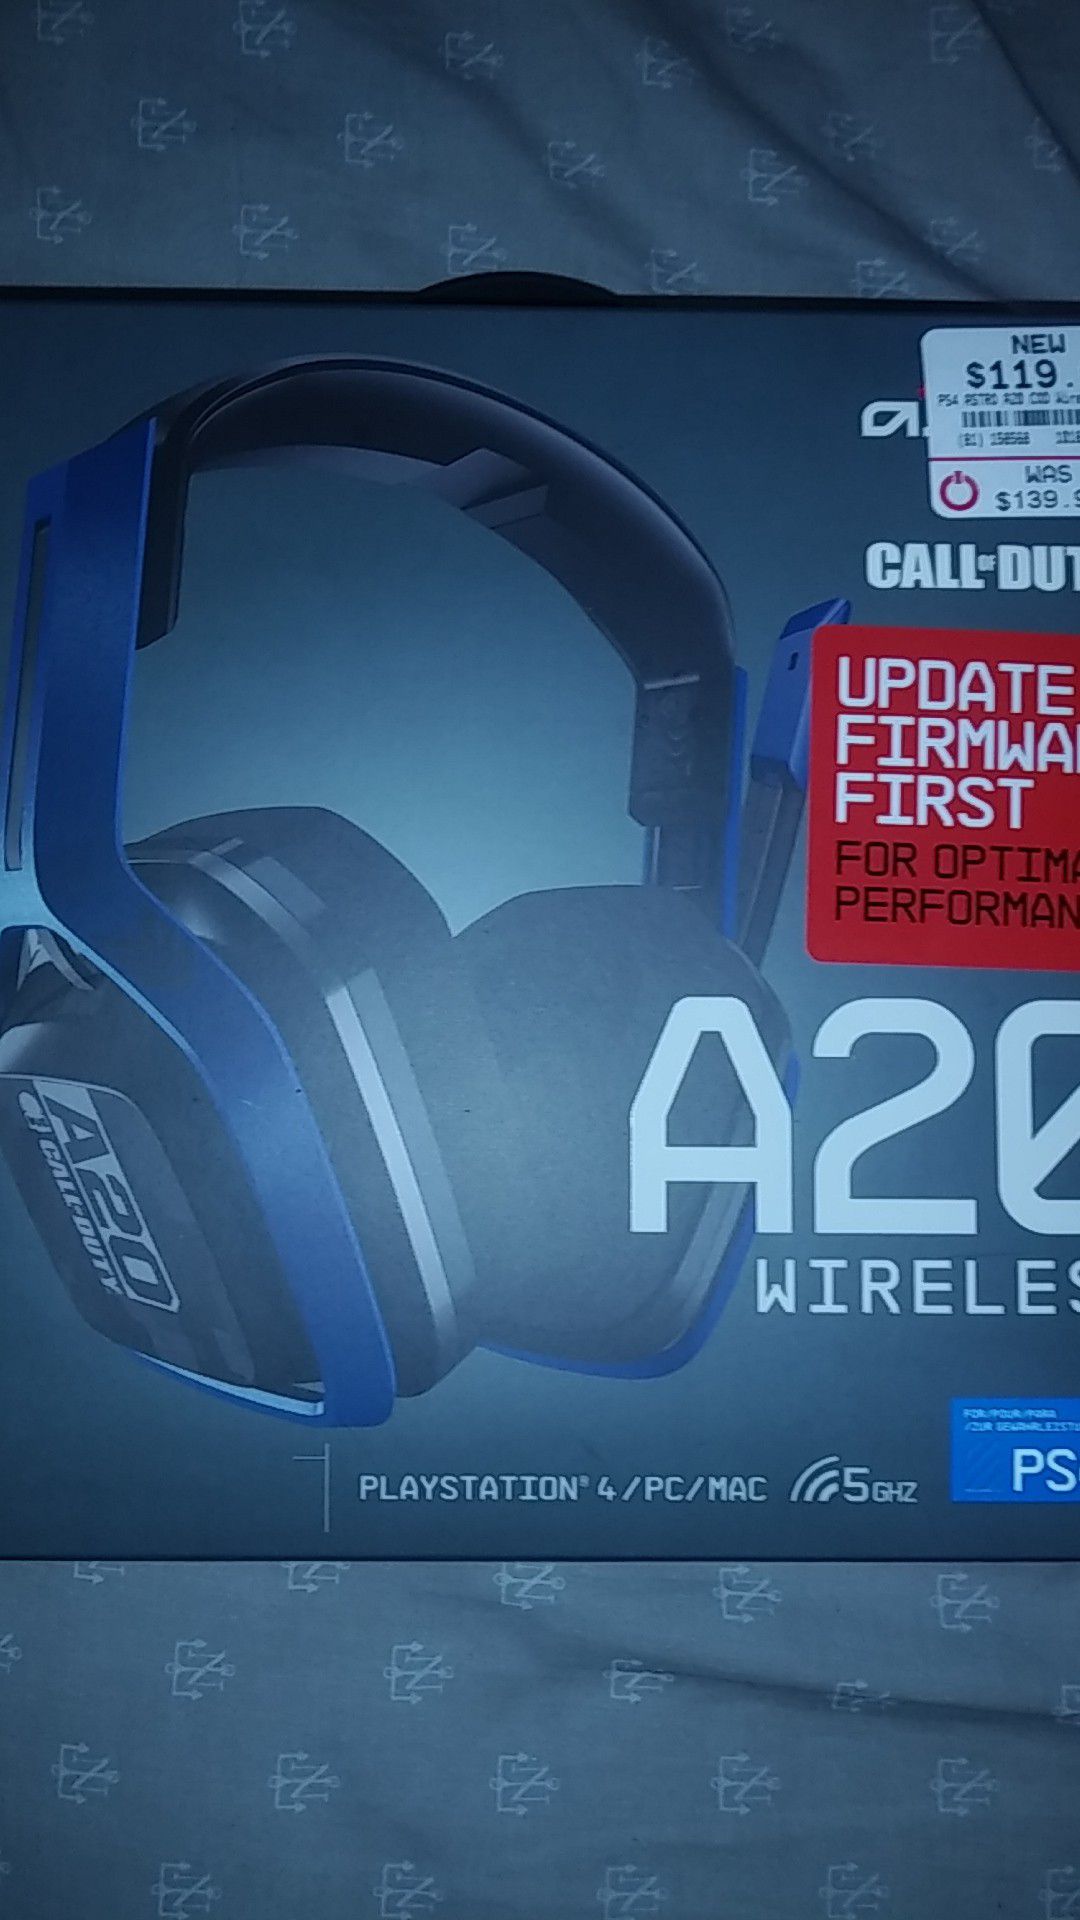 Ps4/pc A20 wireless gaming headphones